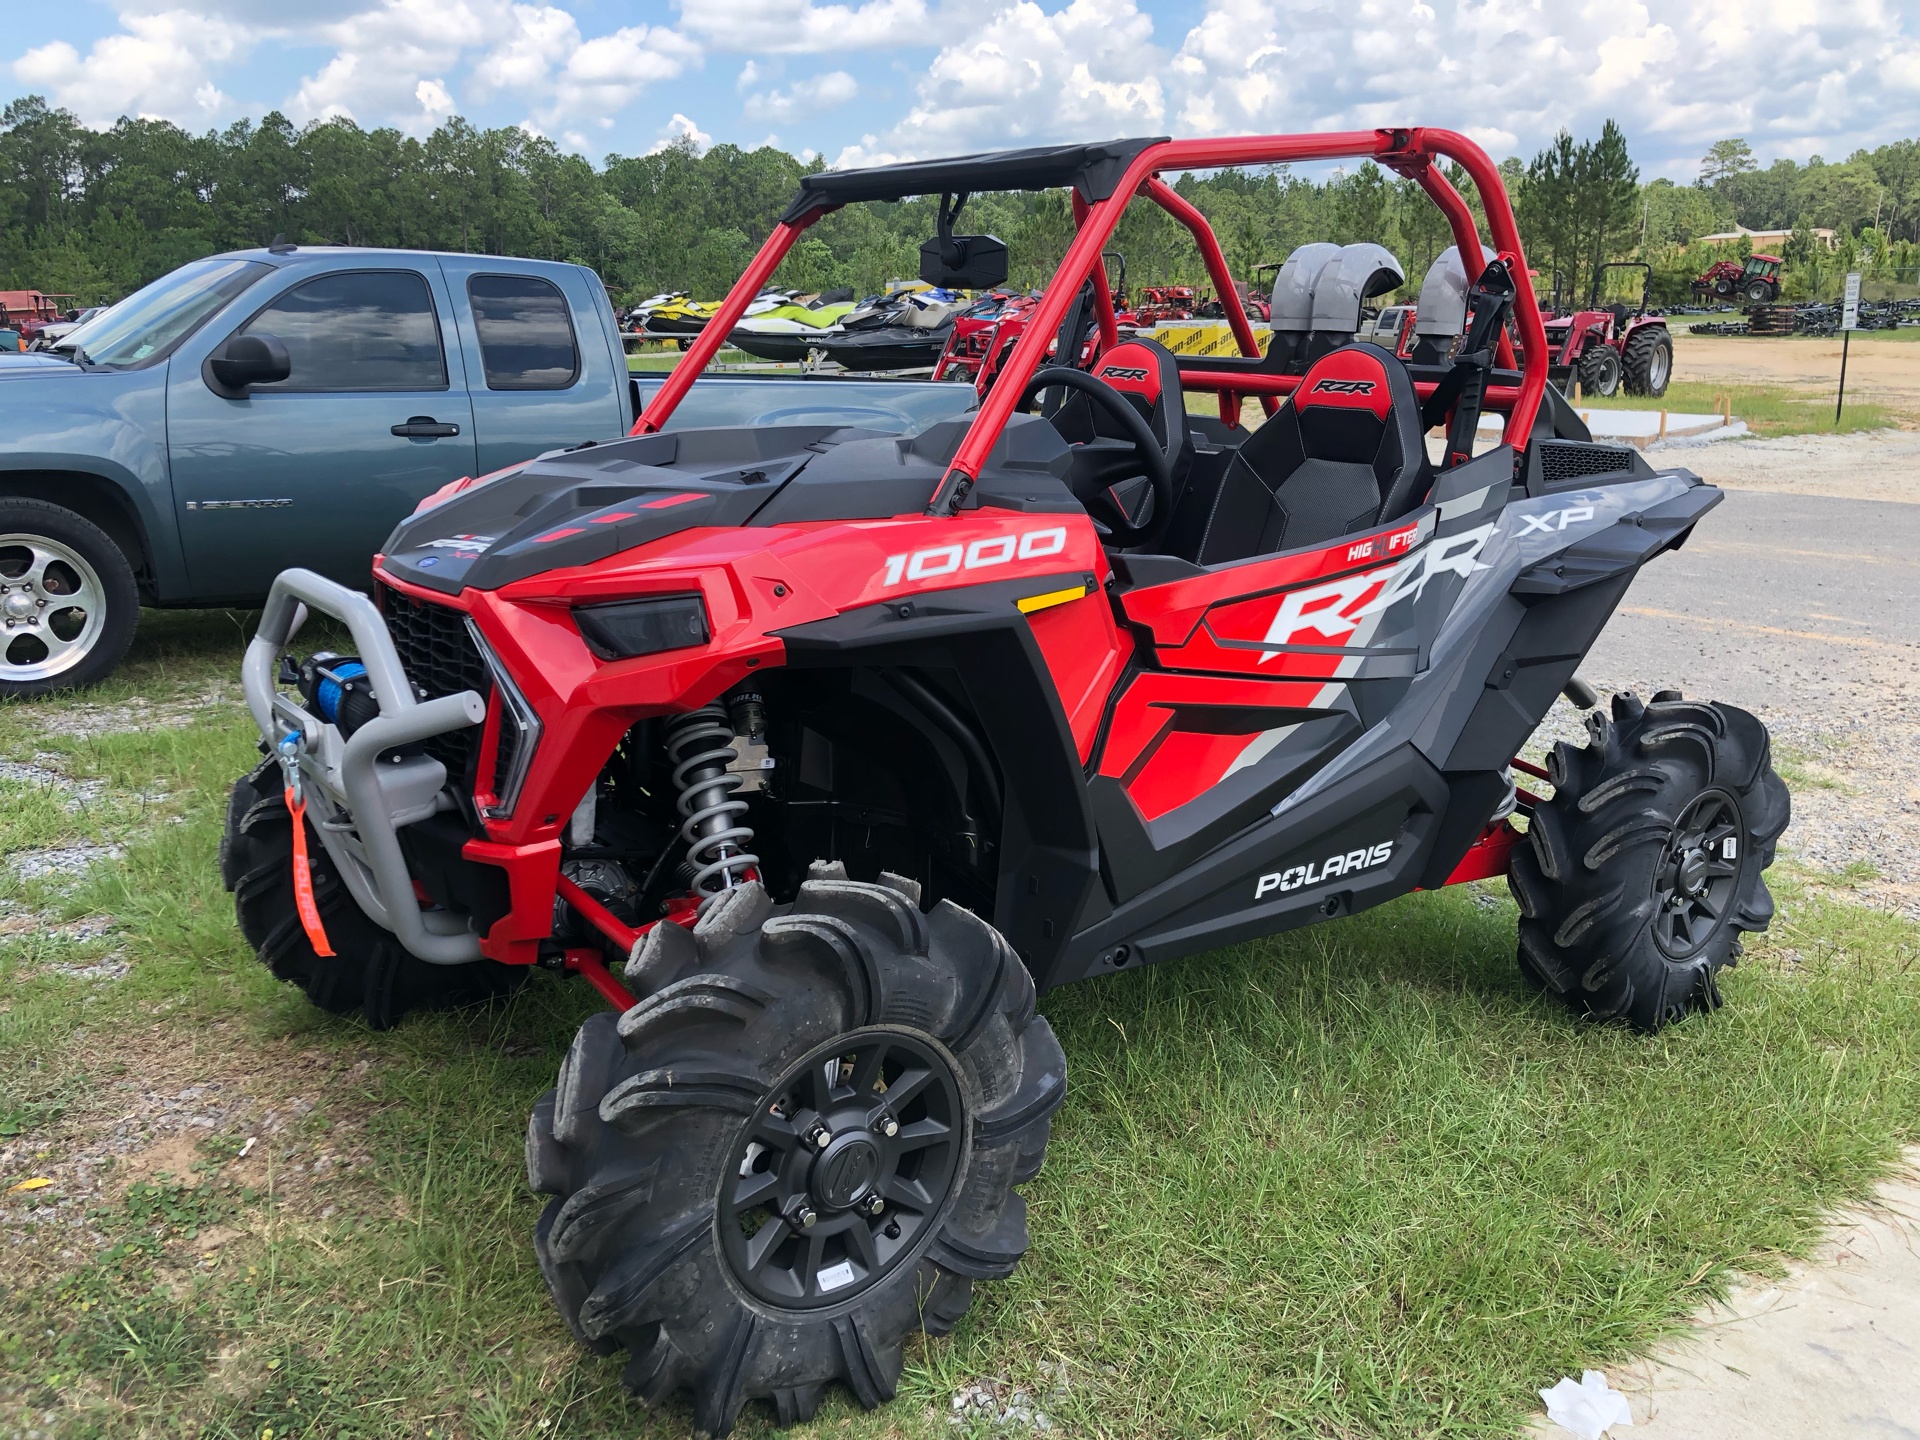 2022 Polaris RZR XP 1000 High Lifter in Saucier, Mississippi - Photo 1